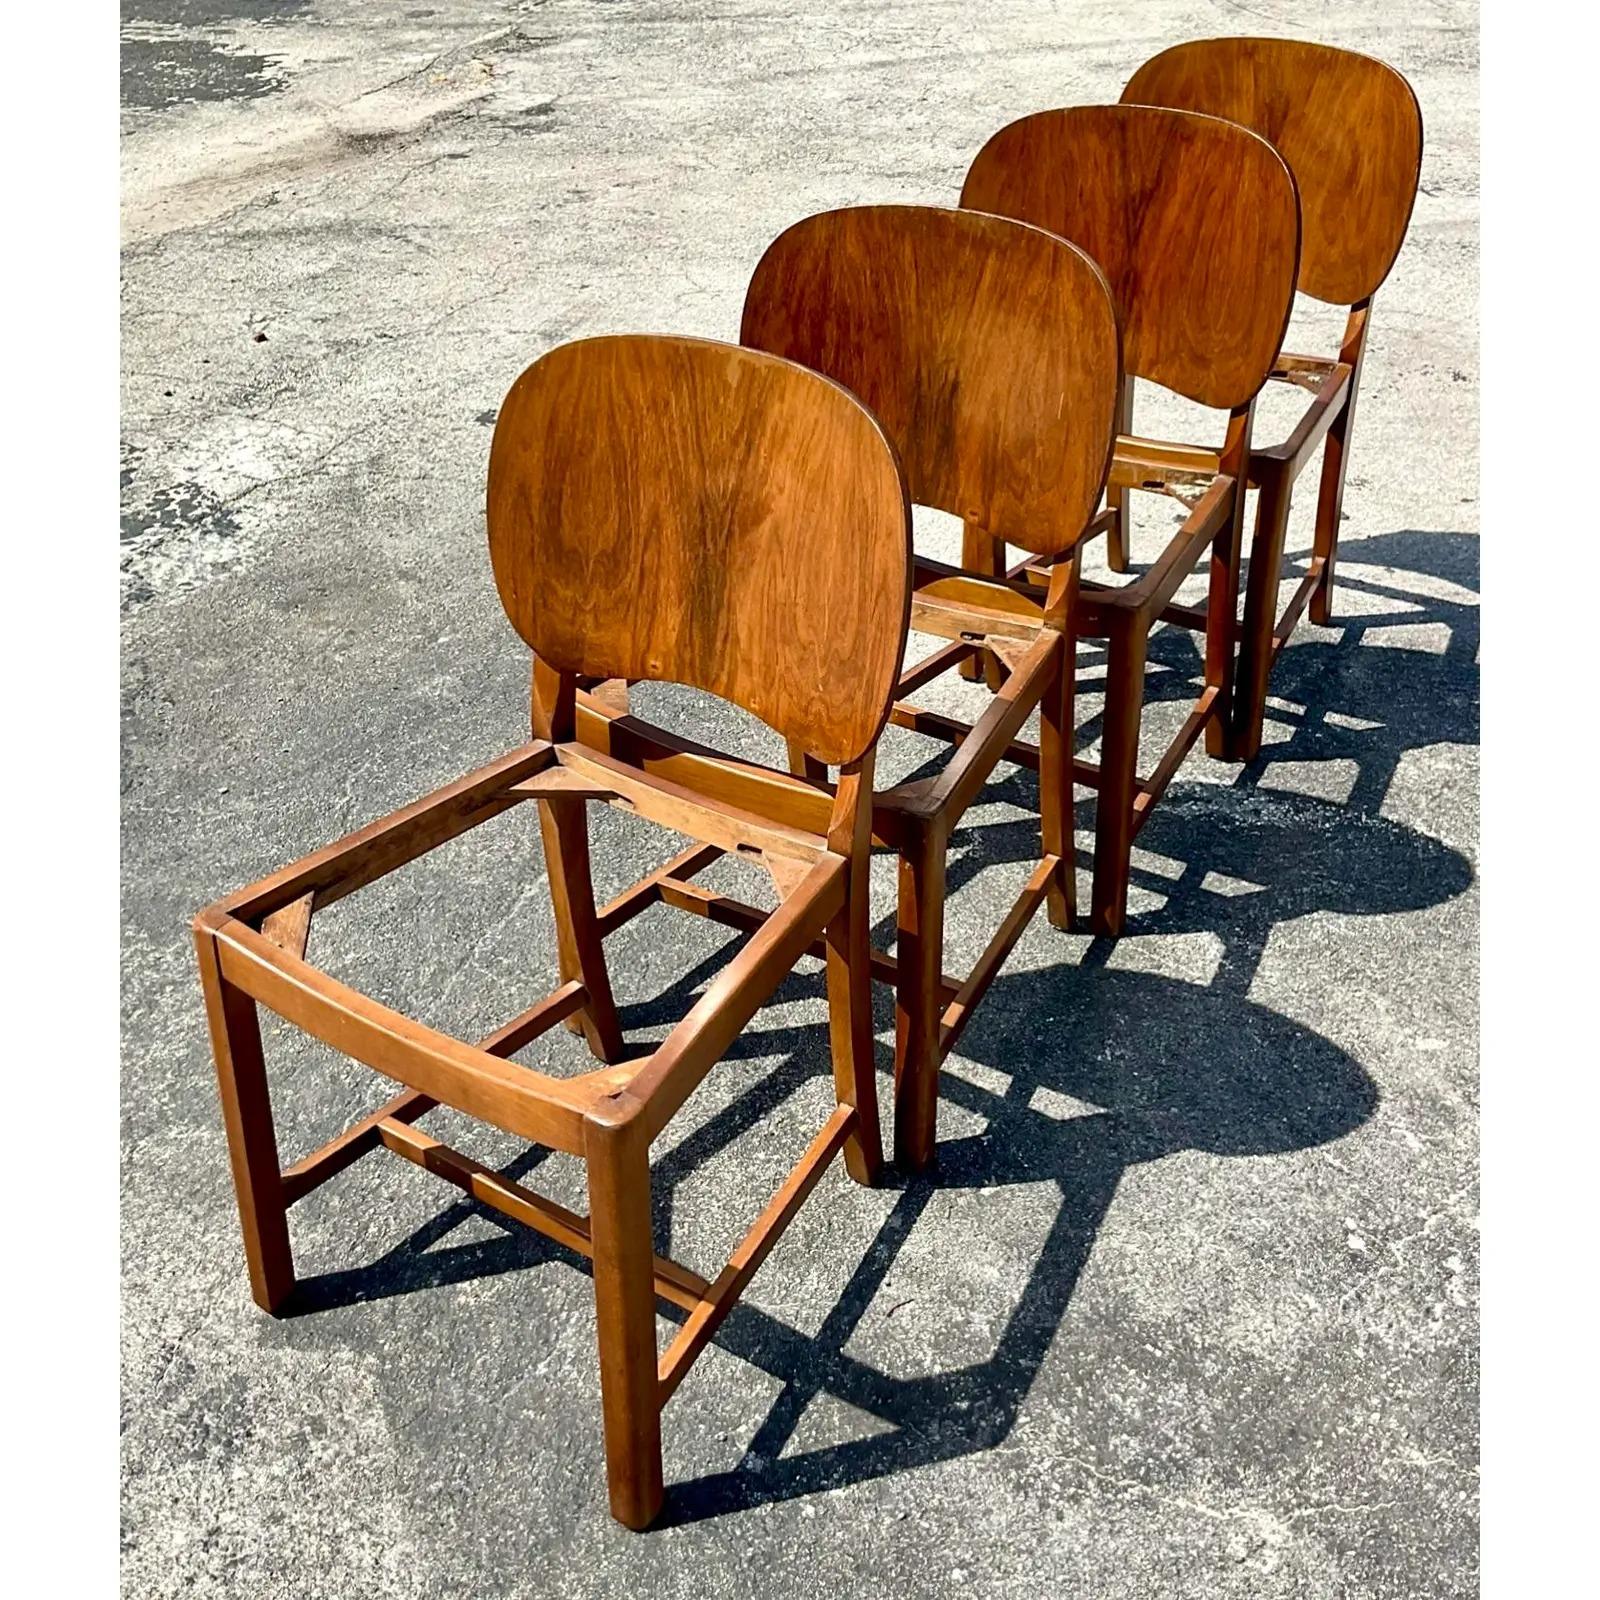 Fantastic set of four vintage Deco dining chairs. Beautiful paddle back design with gorgeous wood grain detail. Ready for you to get fresh seats and make them your own. Acquired from a Palm Beach estate.